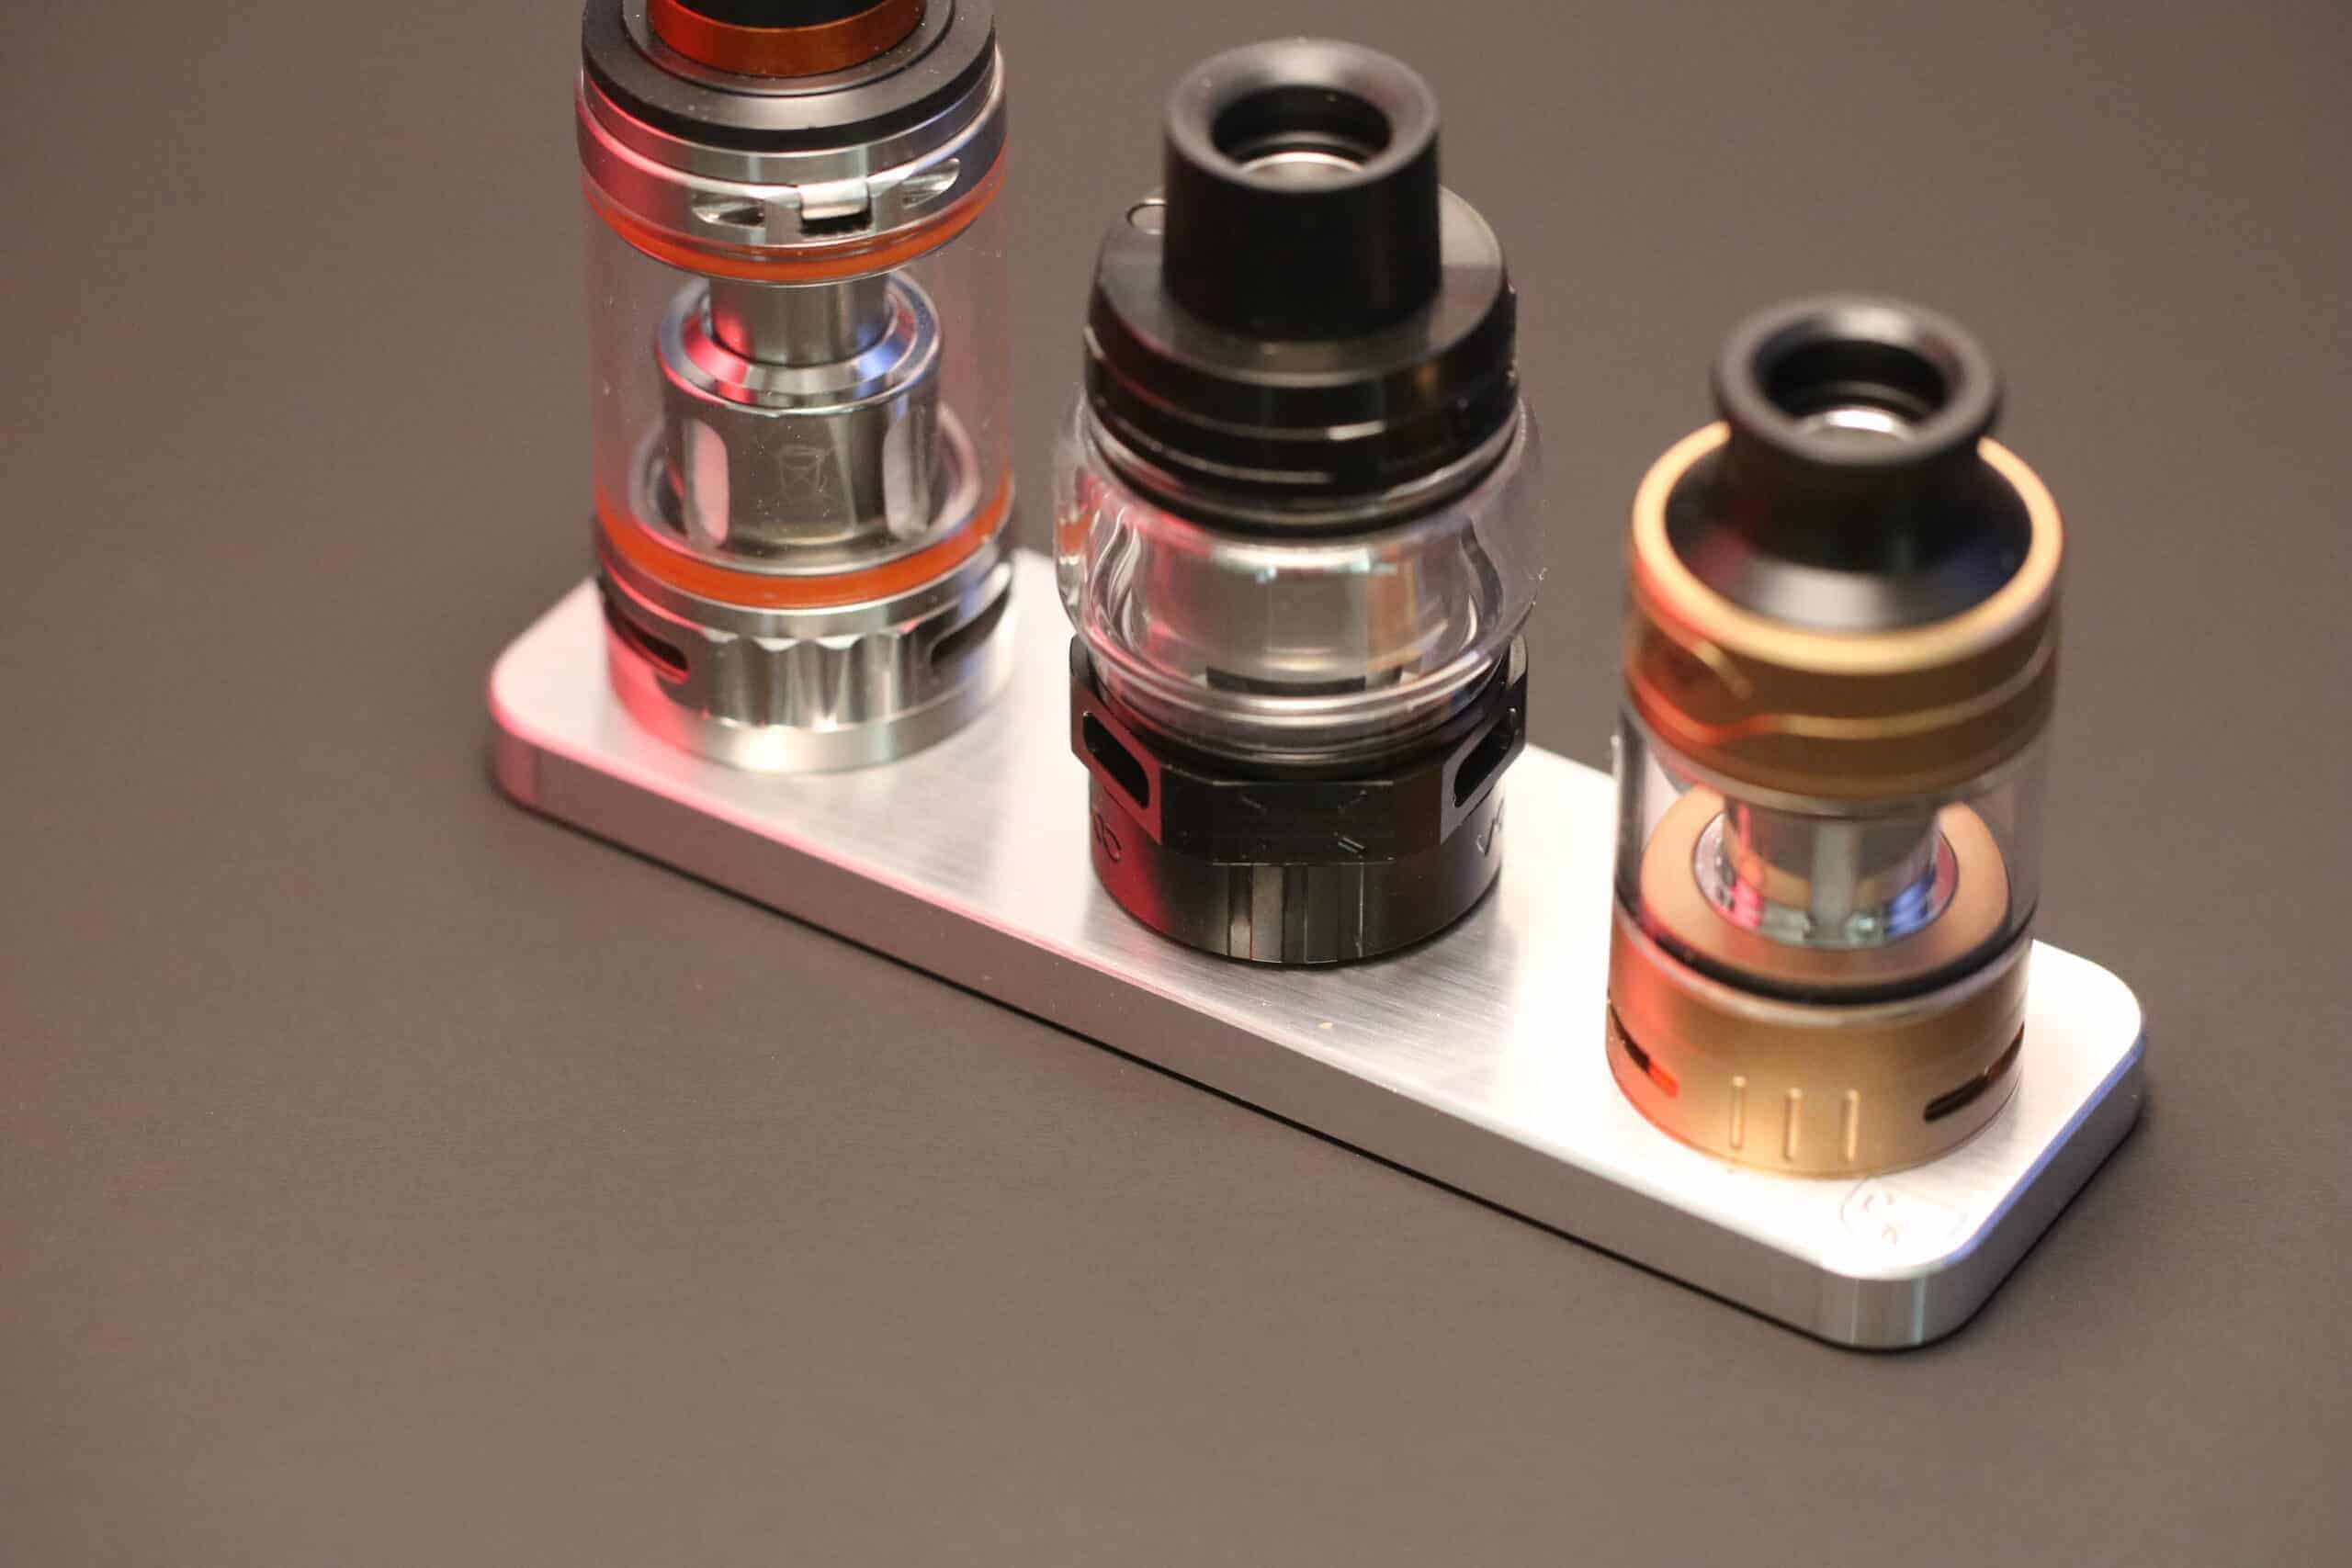 Atomizer Stand - V8pekeeper - The Ultimate Vape Stand